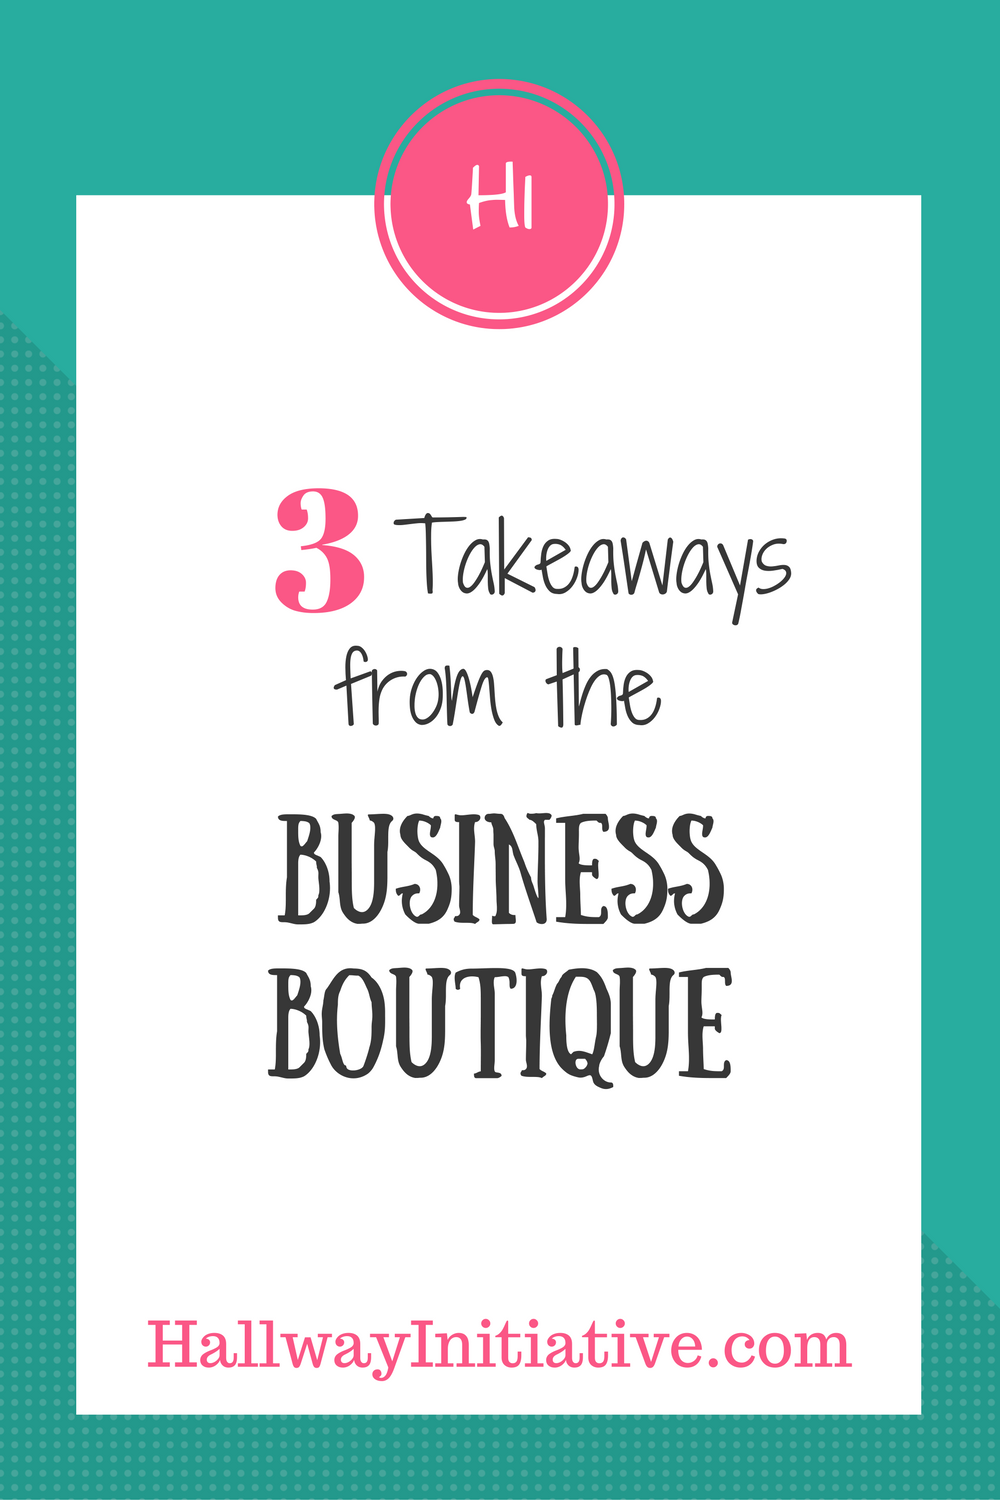 3 takeaways from the business boutique